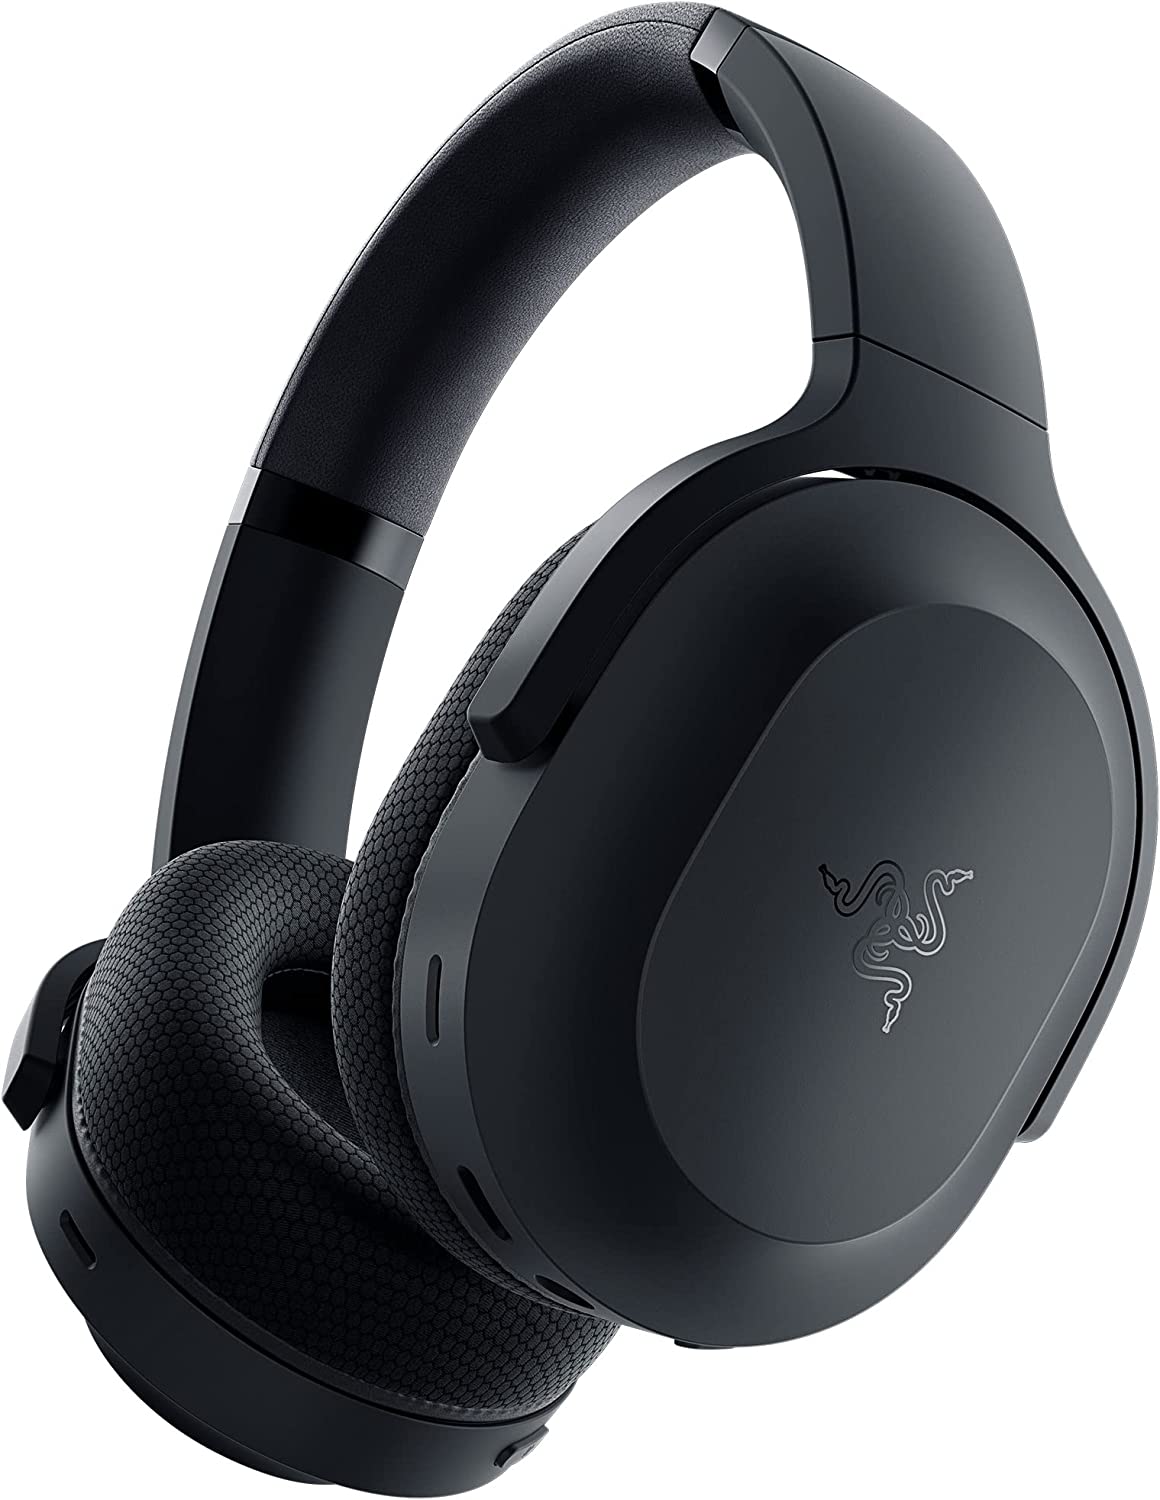 Razer Barracuda Wireless Gaming & Mobile Headset (PC, Playstation, Switch, Android, iOS)